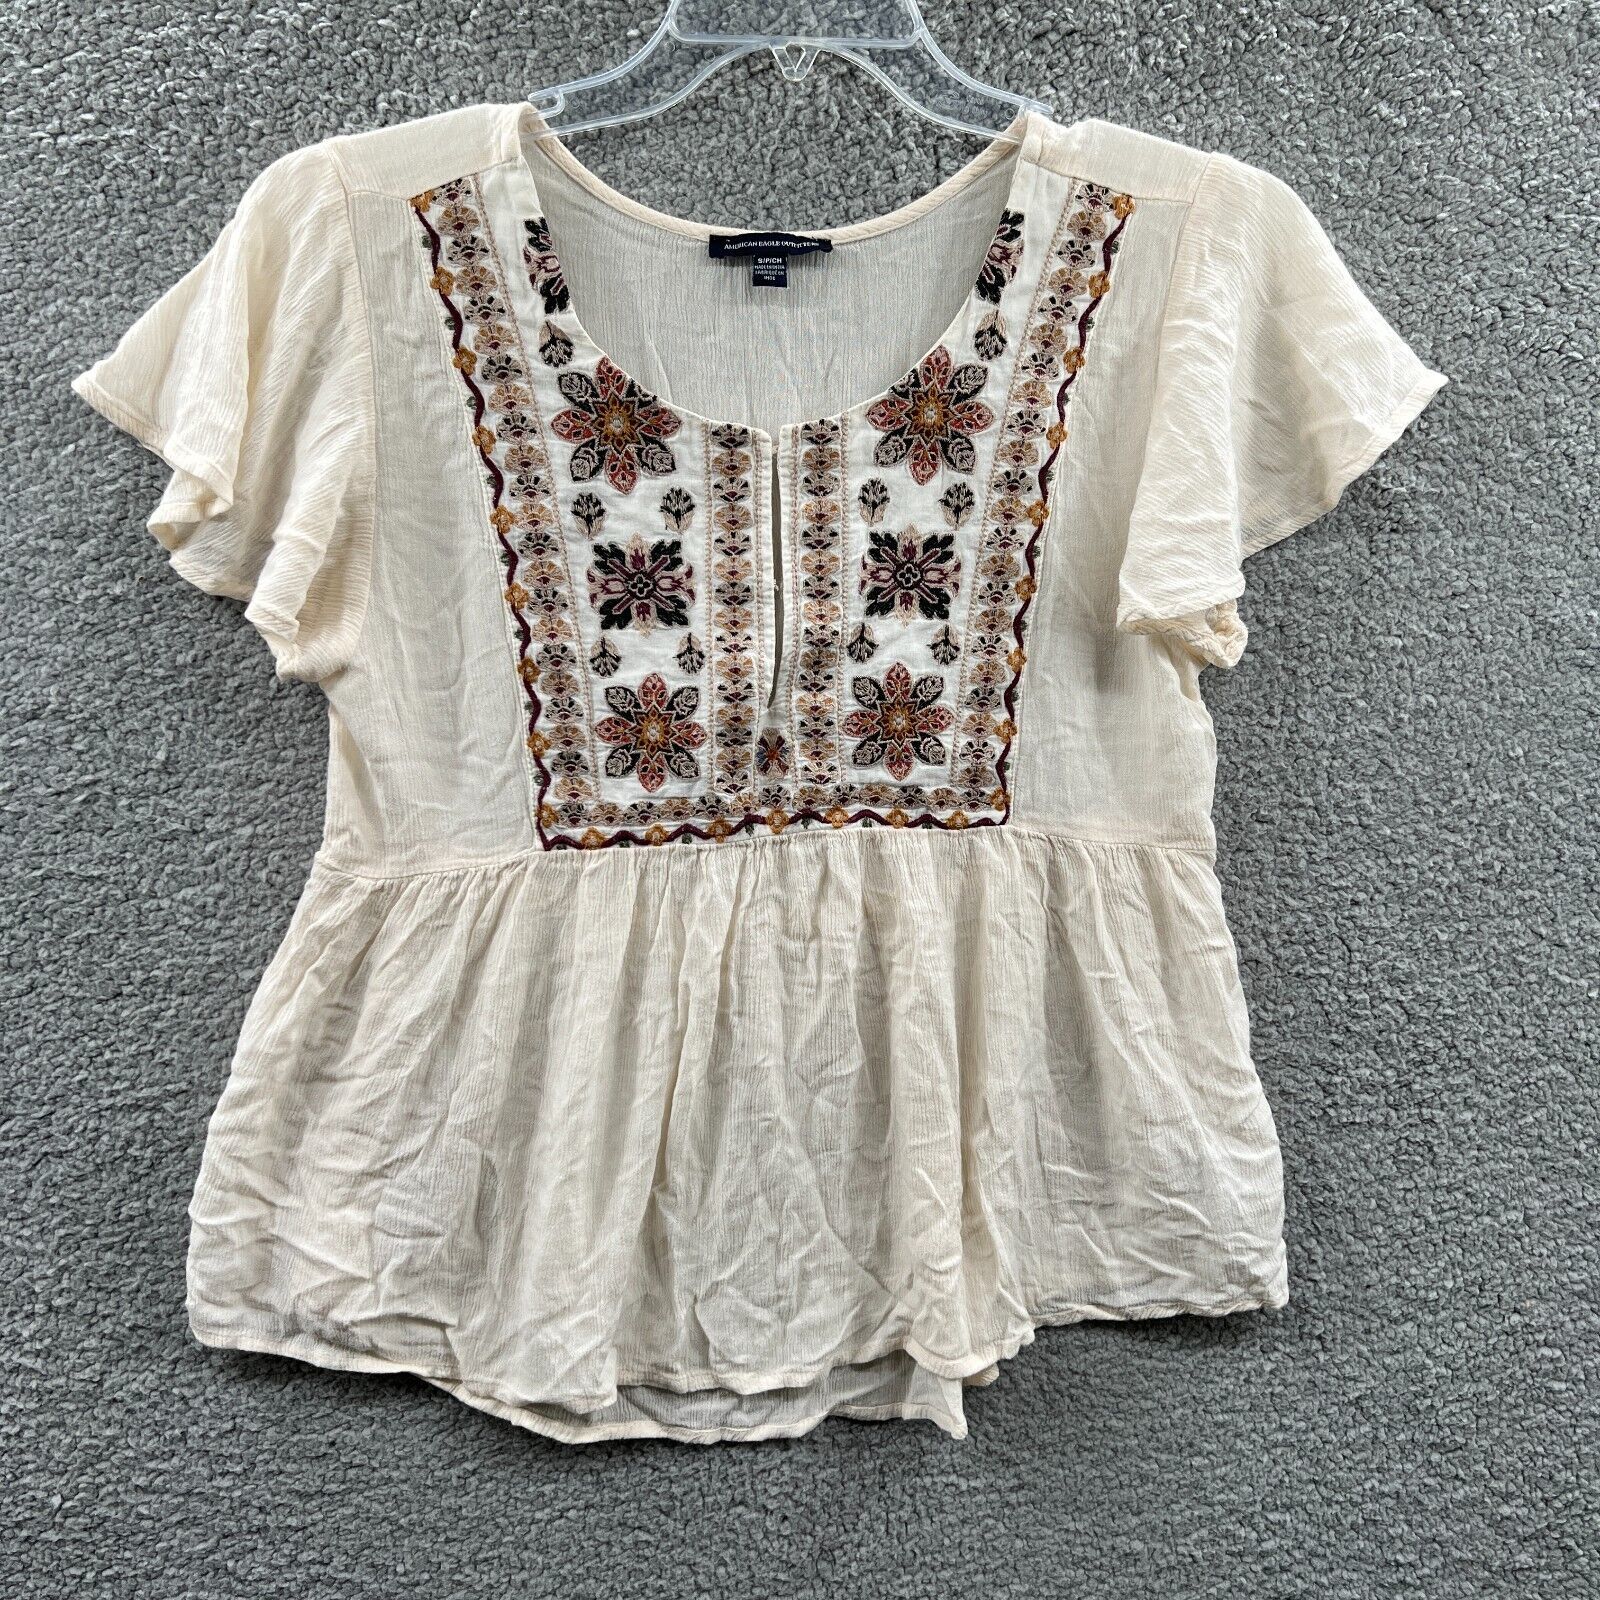 Primary image for American Eagle Womens Shirt Small Tan Short Sleeve Floral Geometric BOHO AEO 